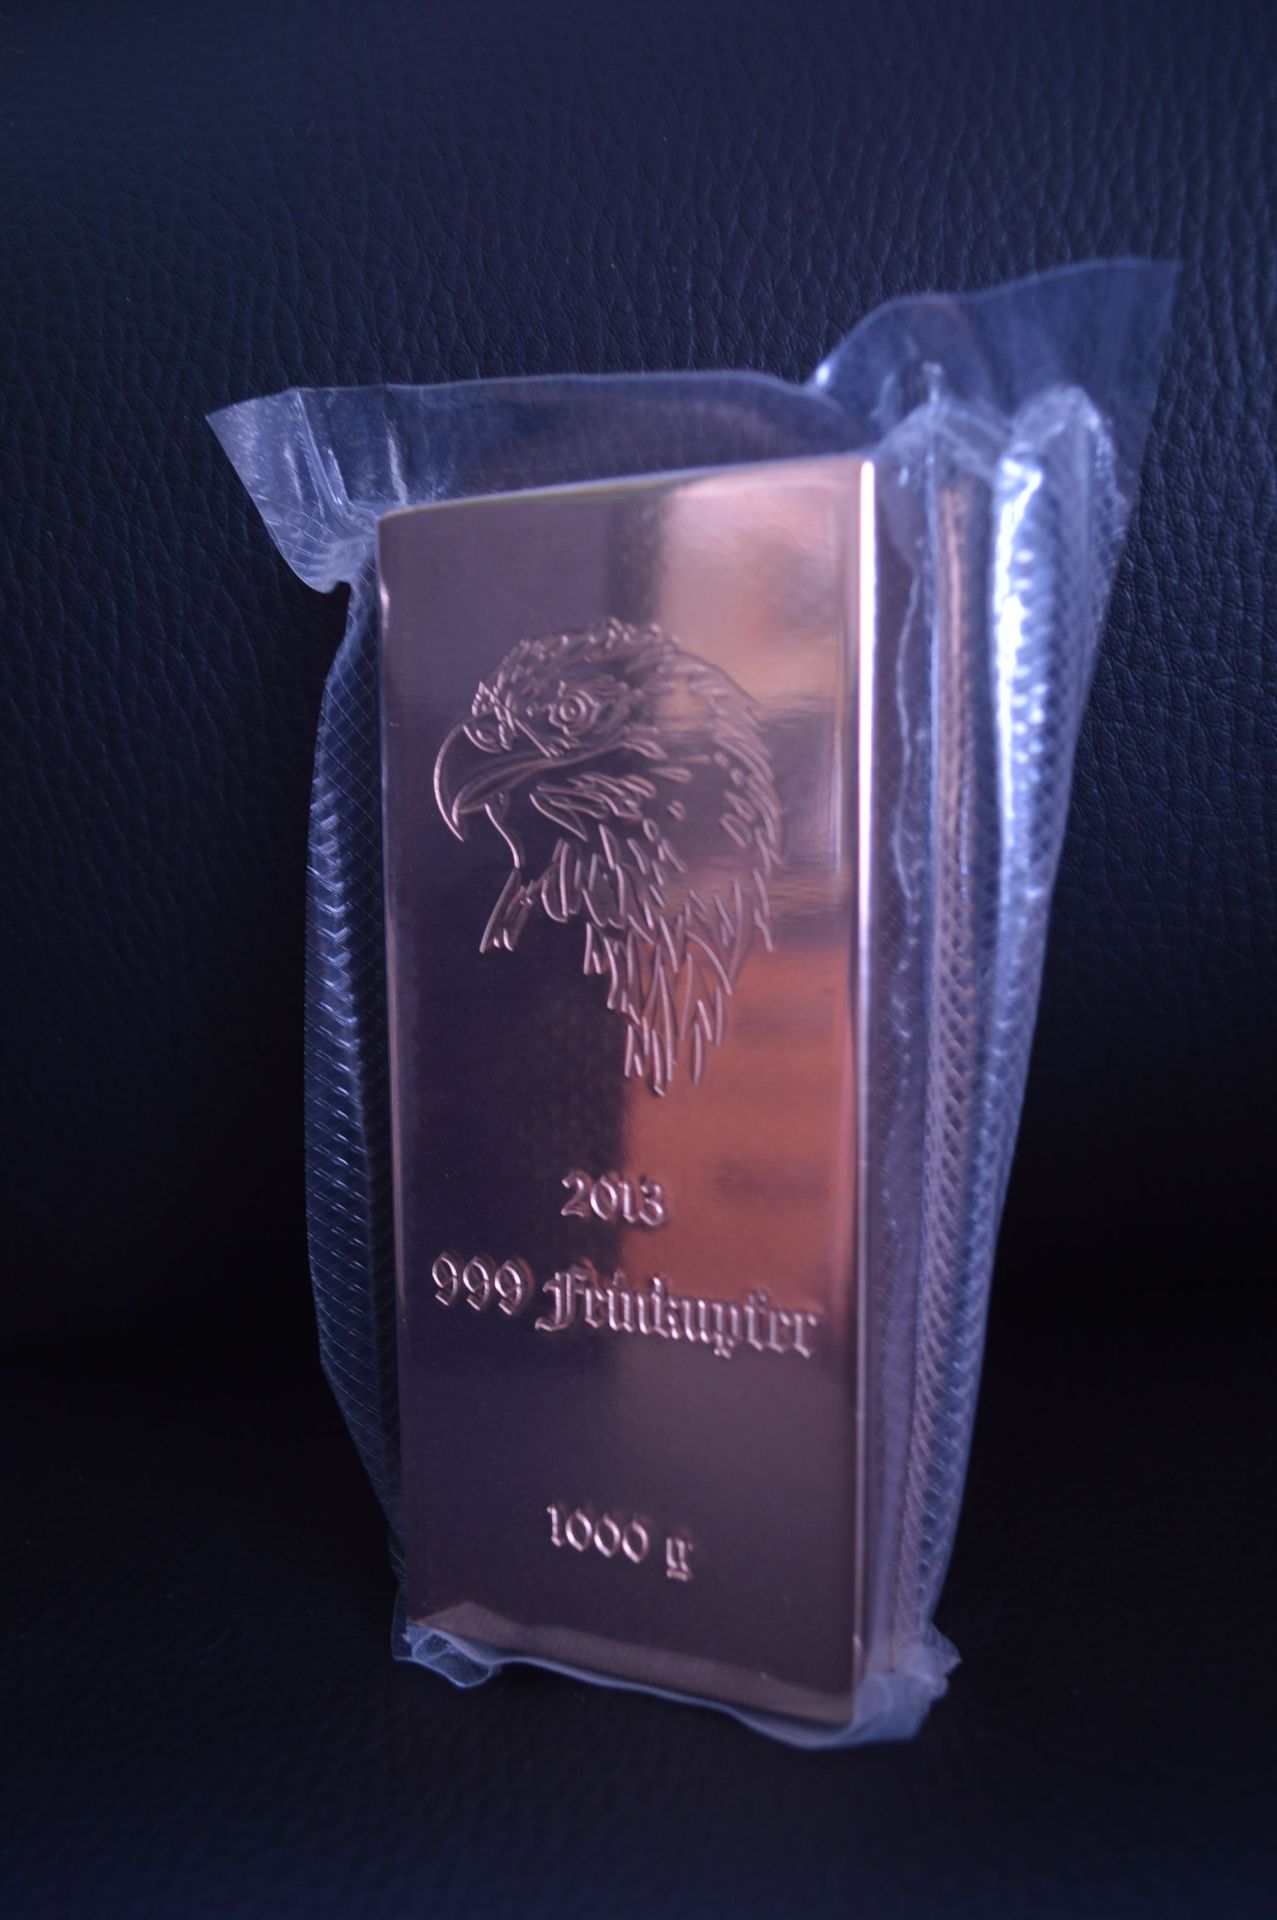 PURE COPPER BULLION .999 = 99.9% pure 1kg lots, INVESTMENT QUALITY - Image 2 of 2